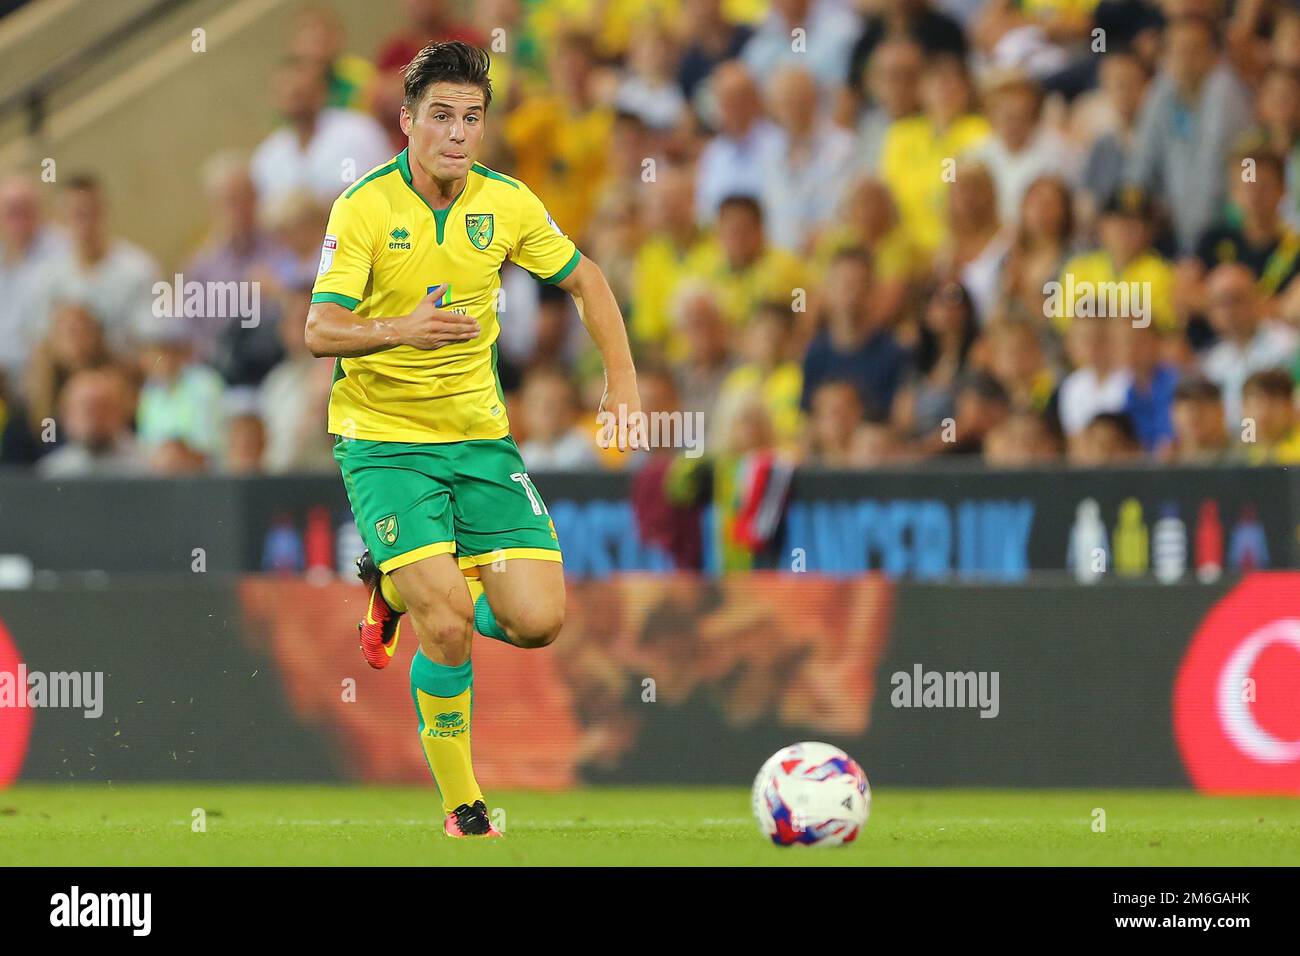 Sergi Canos of Norwich City - Norwich City / Coventry City, zweite Runde des English Football League Cup, Carrow Road, Norwich - 23. August 2016. Stockfoto